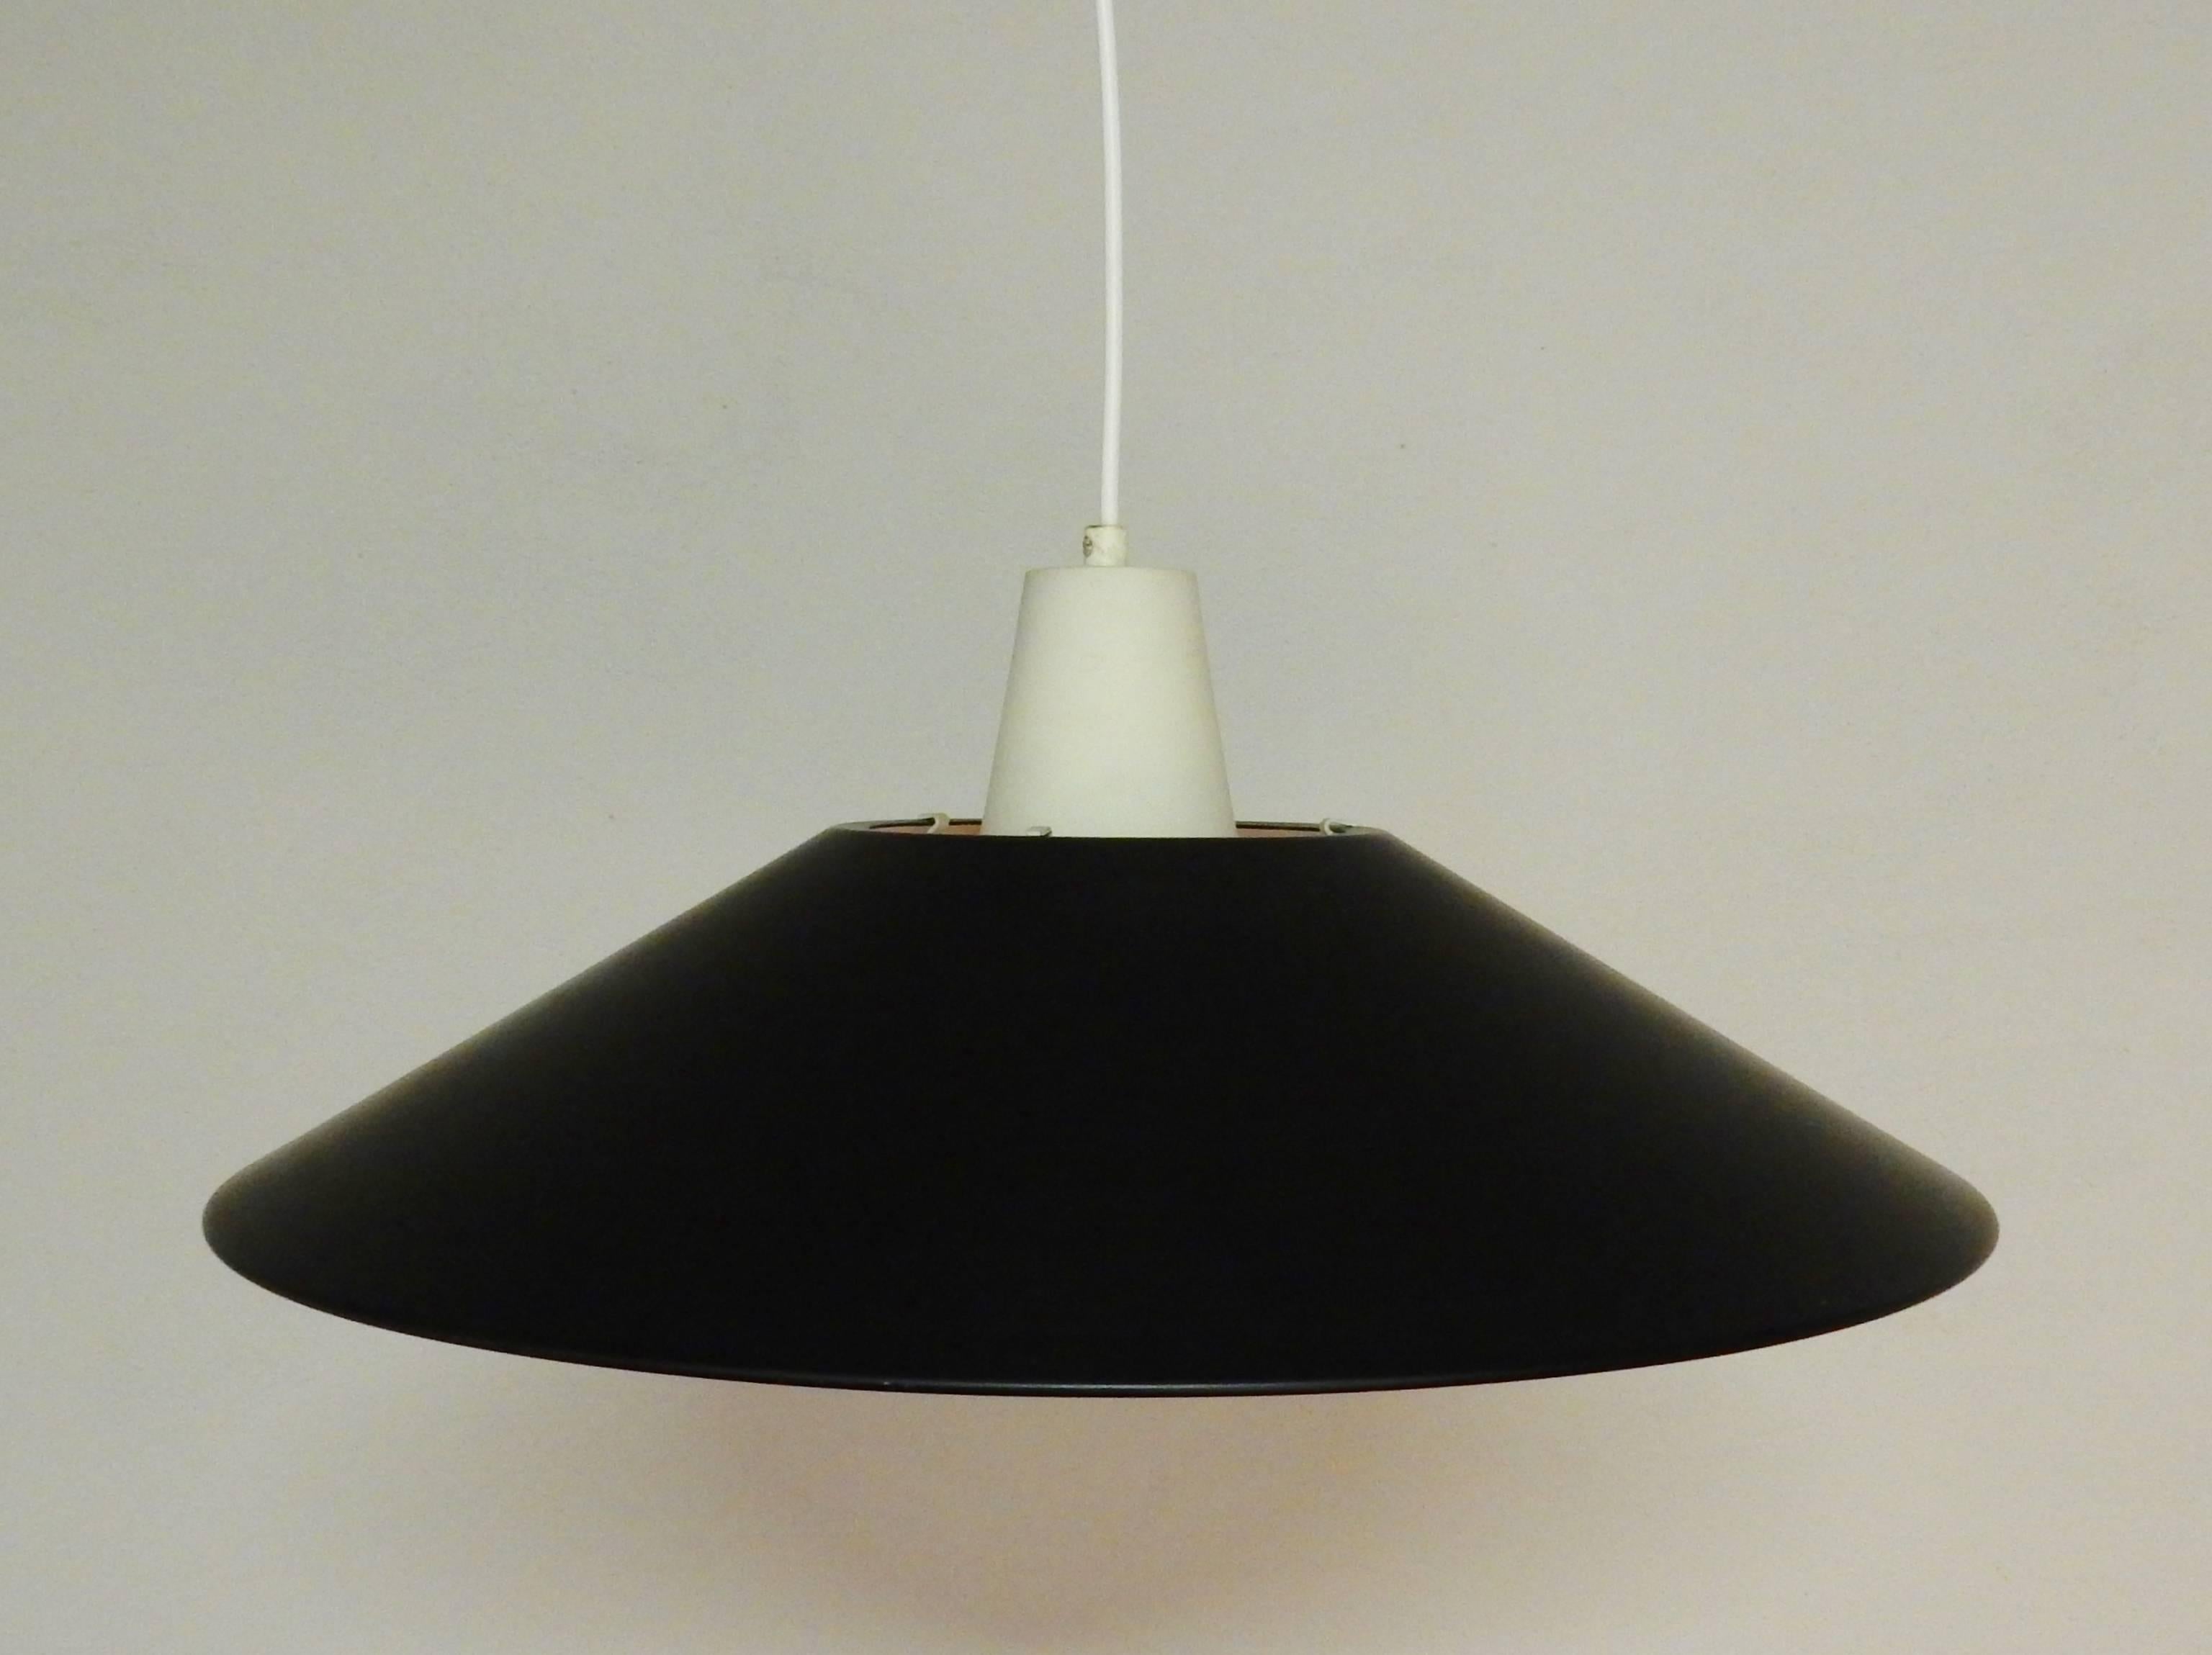 Metal pendant light in a black and white lacquer. A simple but yet very good looking light in a very good condition with some smaller signs of age and use, no dents. The black shade is held in place by the three metal clams/legs. The white metal top